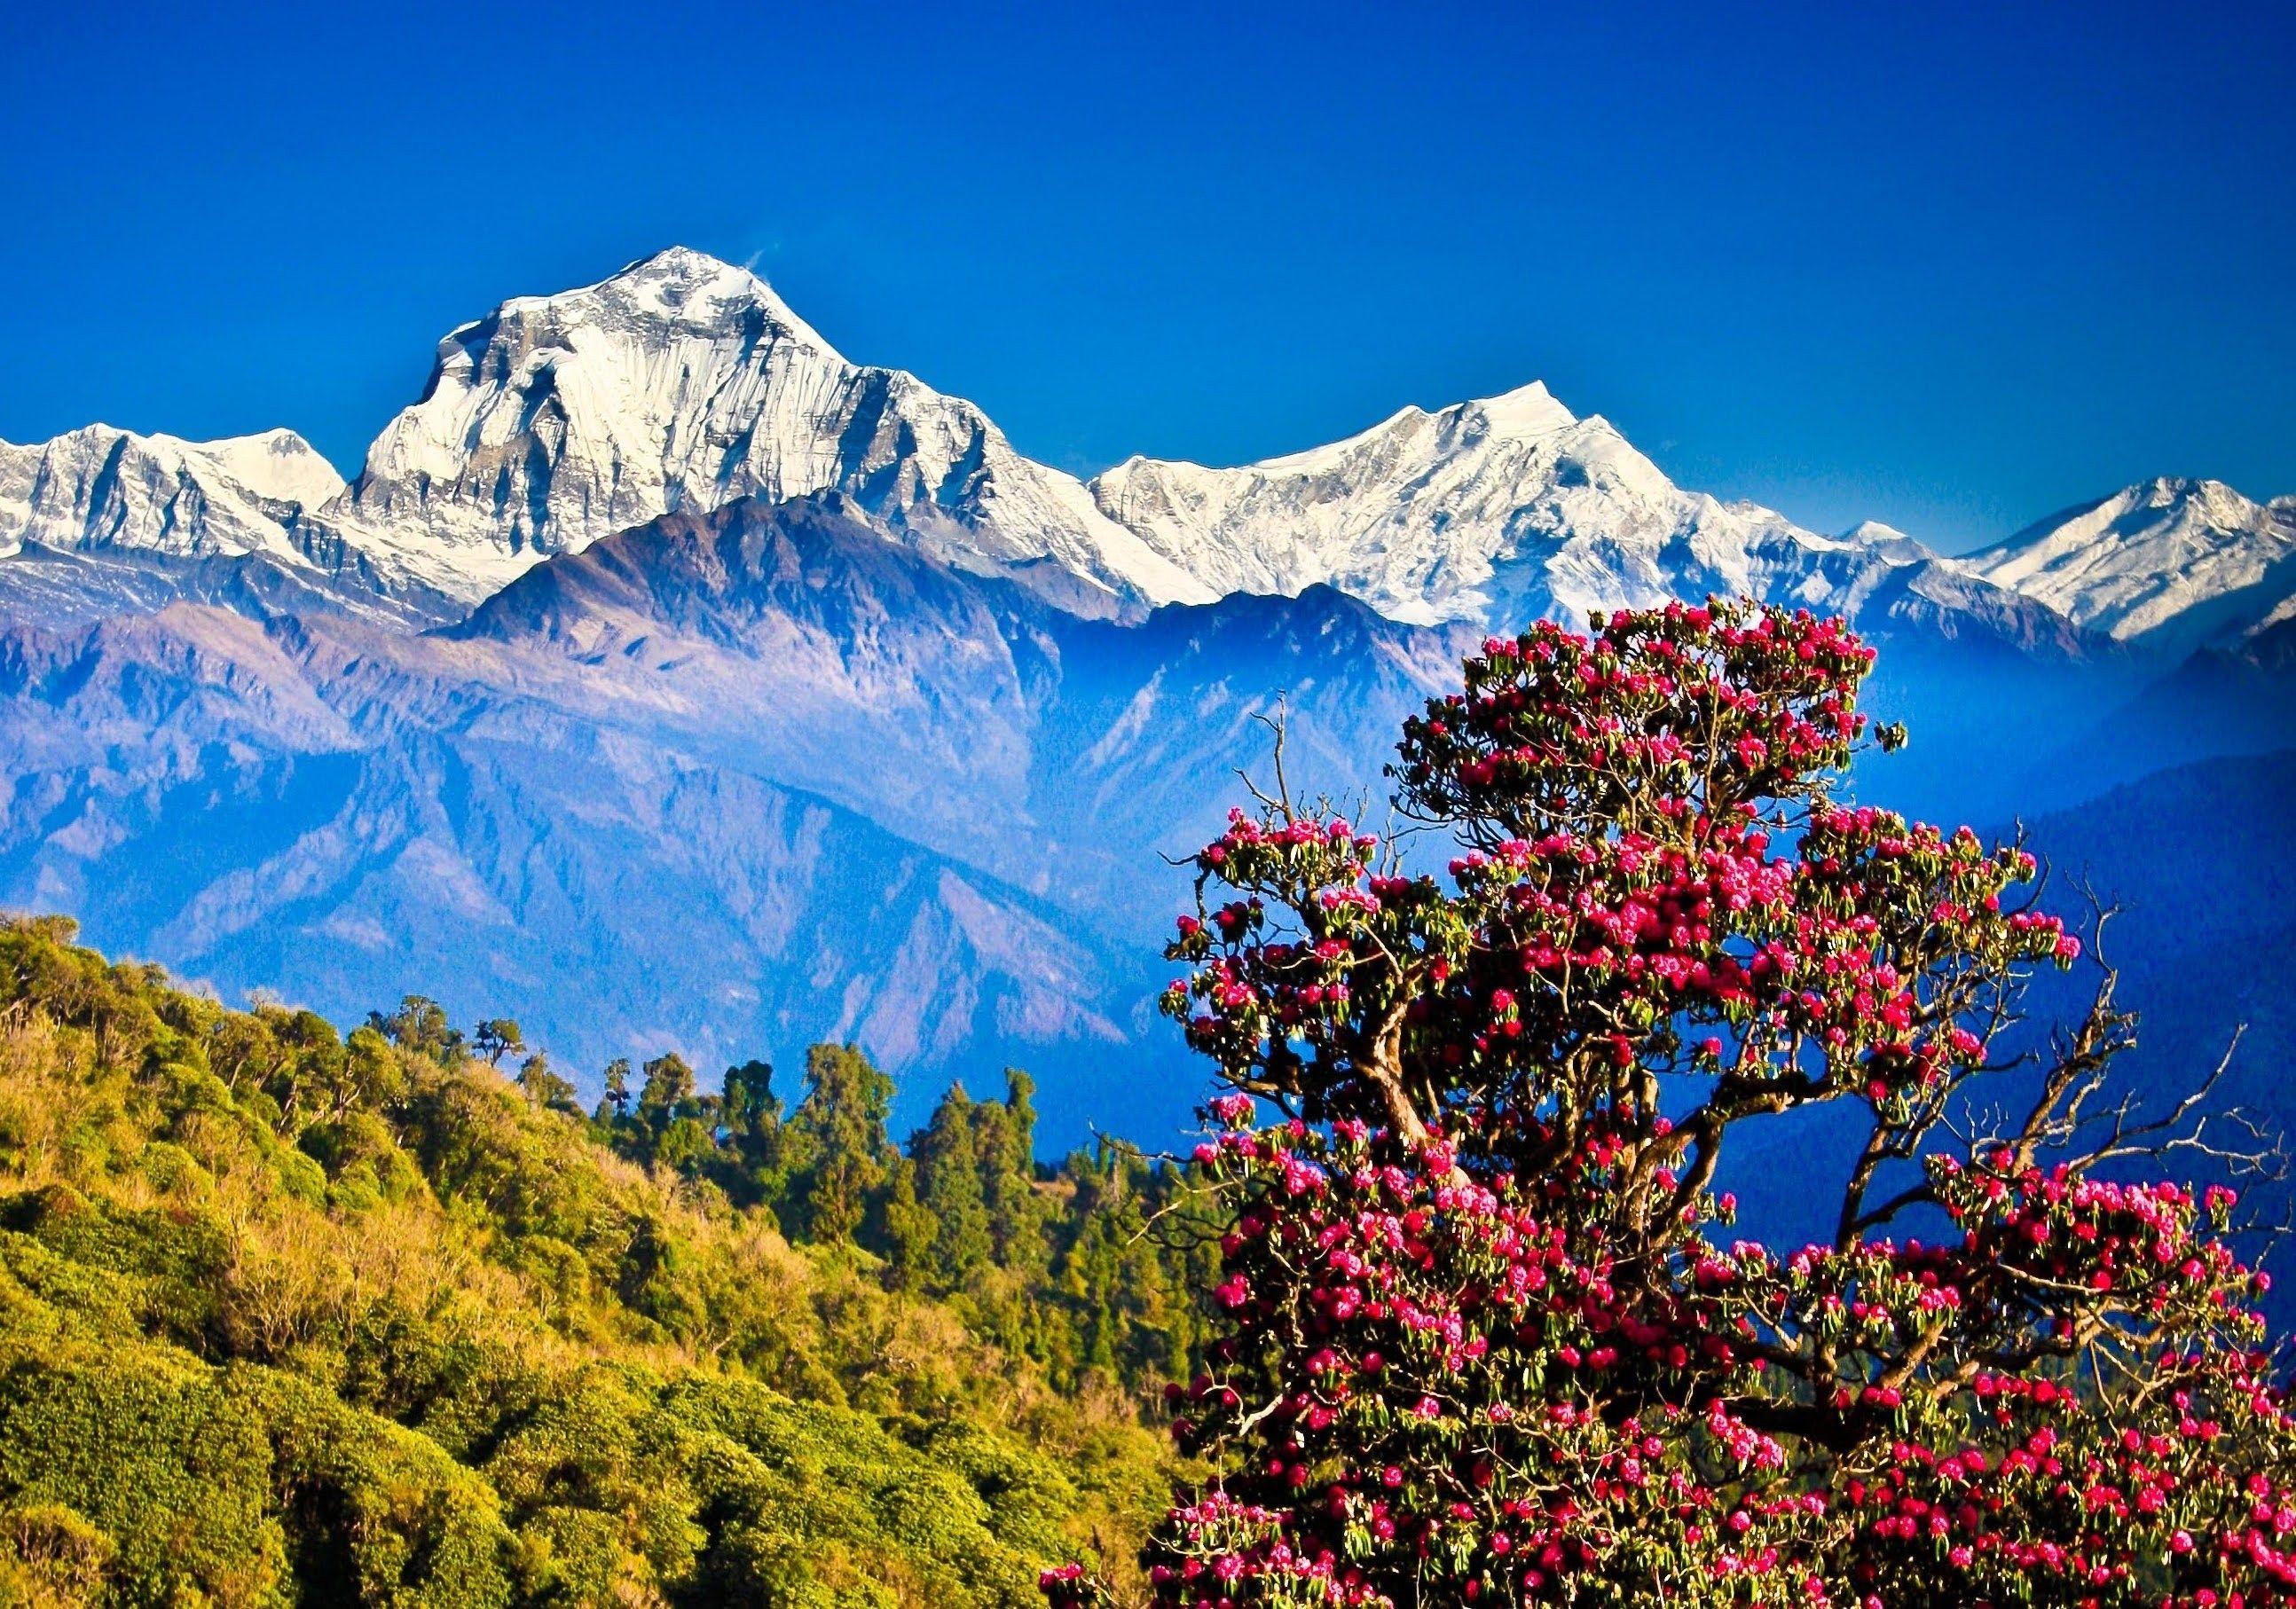 Flowering tree in the Himalayas wallpaper and image